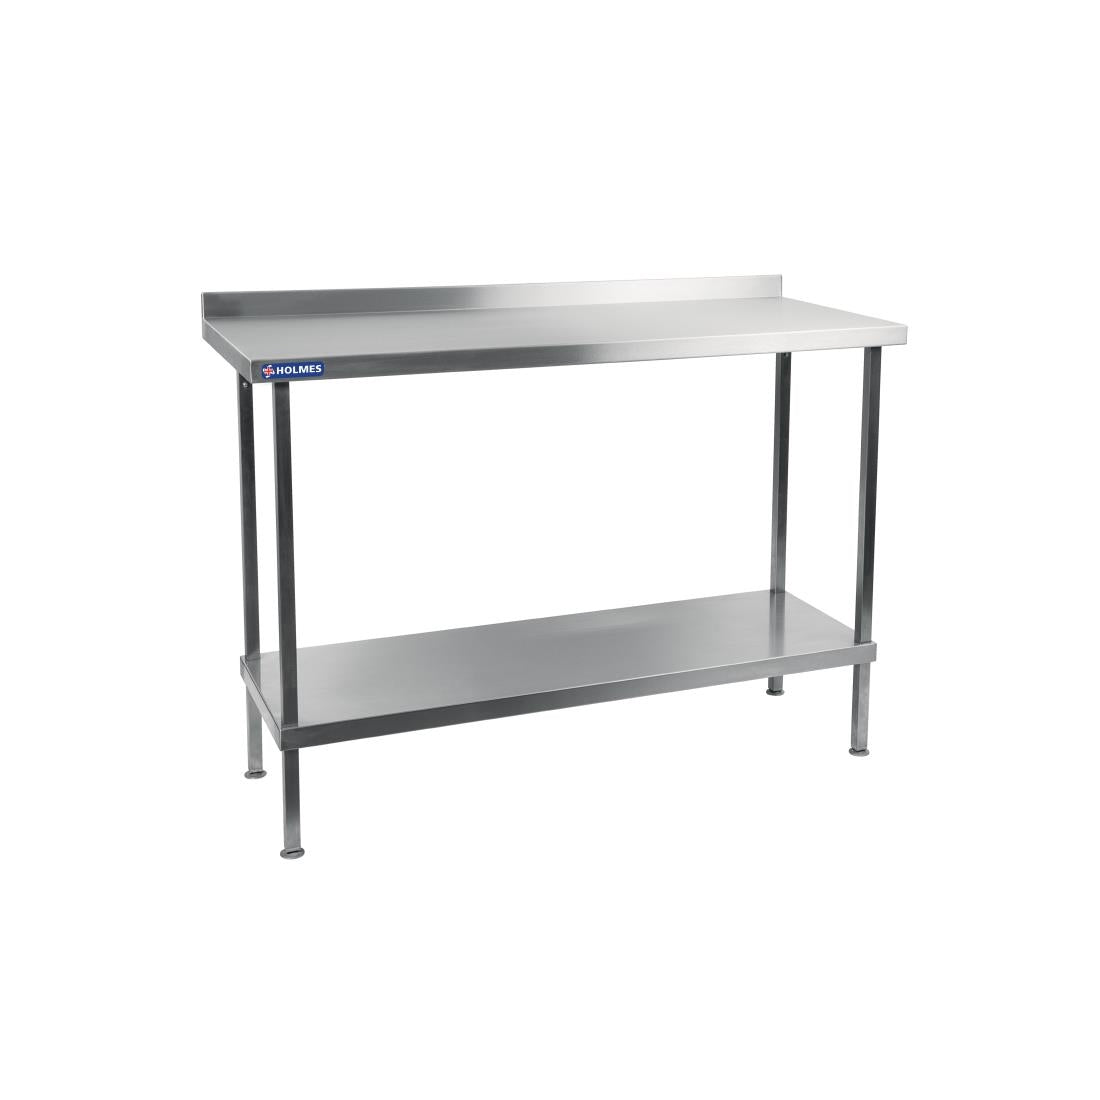 DR020 Holmes Stainless Steel Wall Table with Upstand 600mm JD Catering Equipment Solutions Ltd